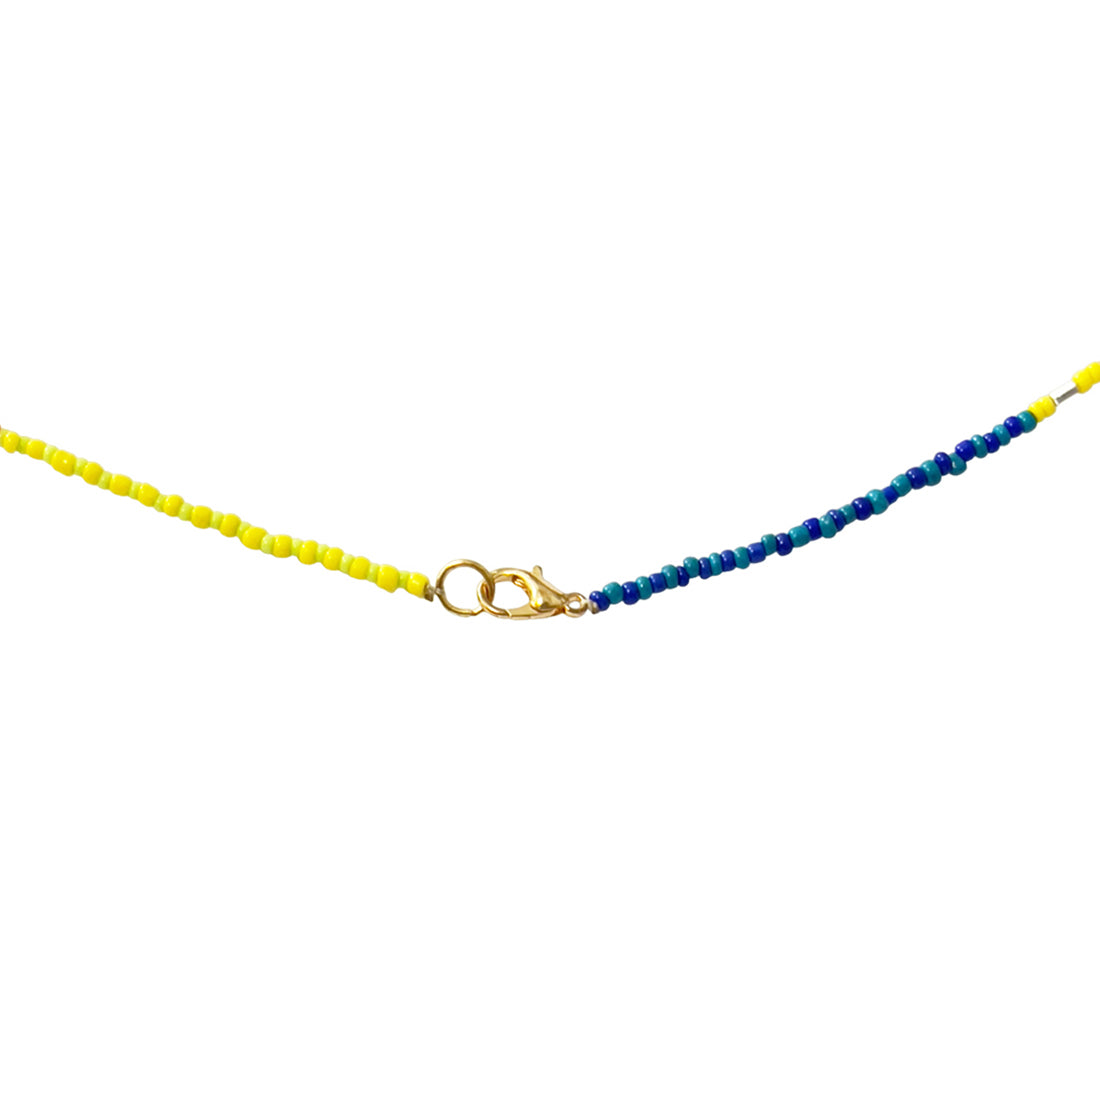 Multicolor Beaded Gold-Toned Long Layered Necklace